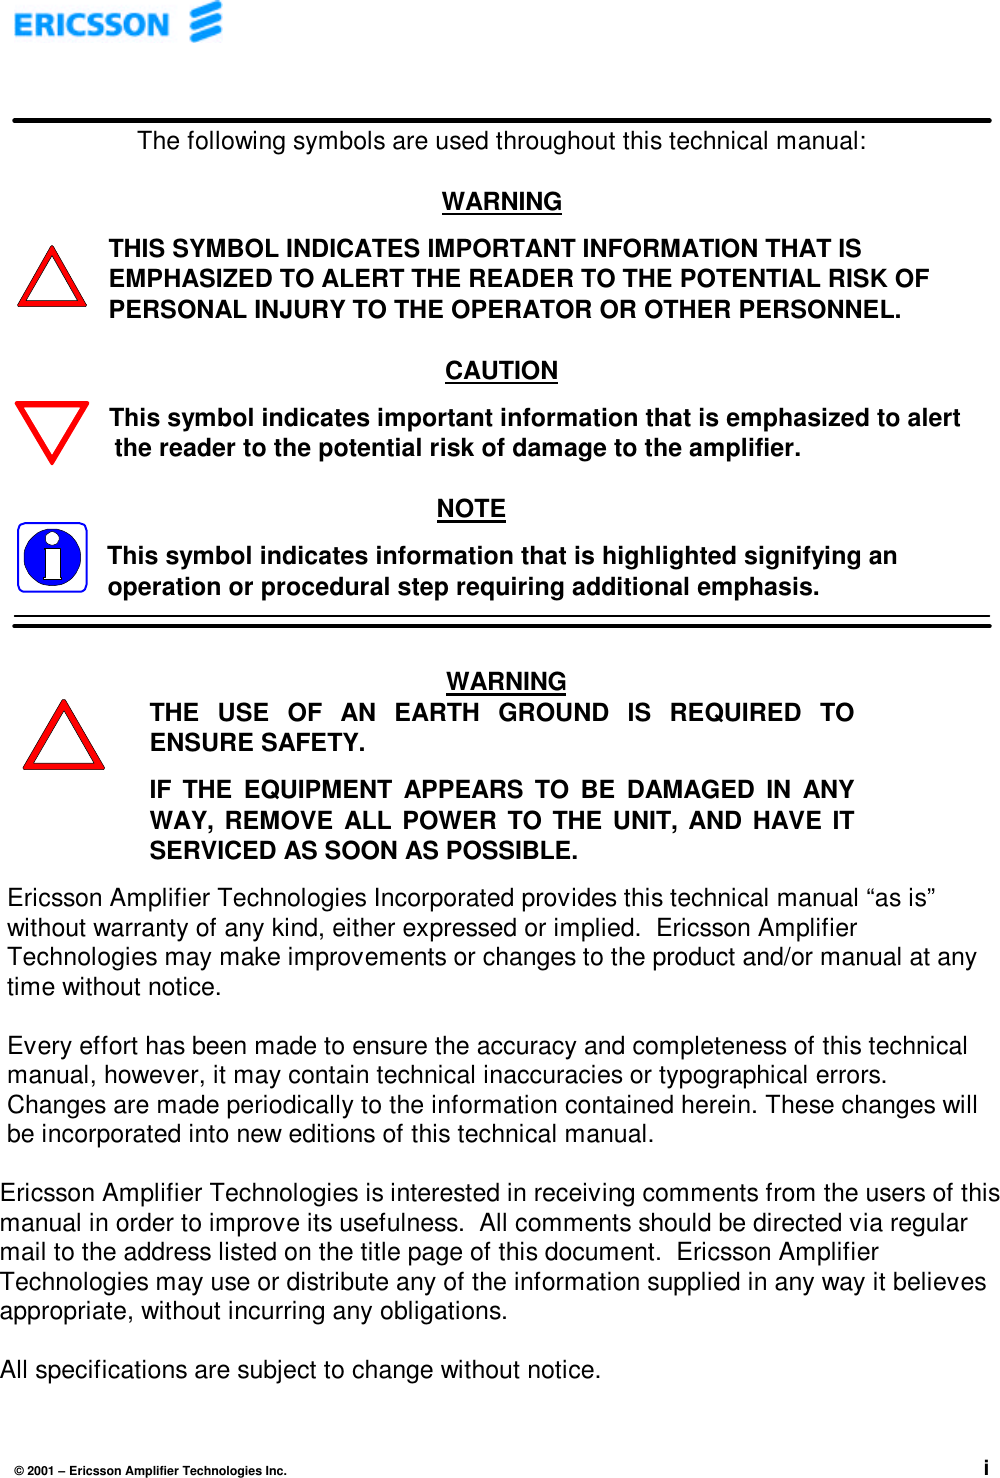 © 2001 – Ericsson Amplifier Technologies Inc. iThe following symbols are used throughout this technical manual:WARNINGTHIS SYMBOL INDICATES IMPORTANT INFORMATION THAT ISEMPHASIZED TO ALERT THE READER TO THE POTENTIAL RISK OFPERSONAL INJURY TO THE OPERATOR OR OTHER PERSONNEL.CAUTIONThis symbol indicates important information that is emphasized to alert   the reader to the potential risk of damage to the amplifier.NOTEThis symbol indicates information that is highlighted signifying anoperation or procedural step requiring additional emphasis.Ericsson Amplifier Technologies Incorporated provides this technical manual “as is”without warranty of any kind, either expressed or implied.  Ericsson AmplifierTechnologies may make improvements or changes to the product and/or manual at anytime without notice.Every effort has been made to ensure the accuracy and completeness of this technicalmanual, however, it may contain technical inaccuracies or typographical errors.Changes are made periodically to the information contained herein. These changes willbe incorporated into new editions of this technical manual.Ericsson Amplifier Technologies is interested in receiving comments from the users of thismanual in order to improve its usefulness.  All comments should be directed via regularmail to the address listed on the title page of this document.  Ericsson AmplifierTechnologies may use or distribute any of the information supplied in any way it believesappropriate, without incurring any obligations.All specifications are subject to change without notice.WARNINGTHE USE OF AN EARTH GROUND IS REQUIRED TOENSURE SAFETY.IF THE EQUIPMENT APPEARS TO BE DAMAGED IN ANYWAY, REMOVE ALL POWER TO THE UNIT, AND HAVE ITSERVICED AS SOON AS POSSIBLE.